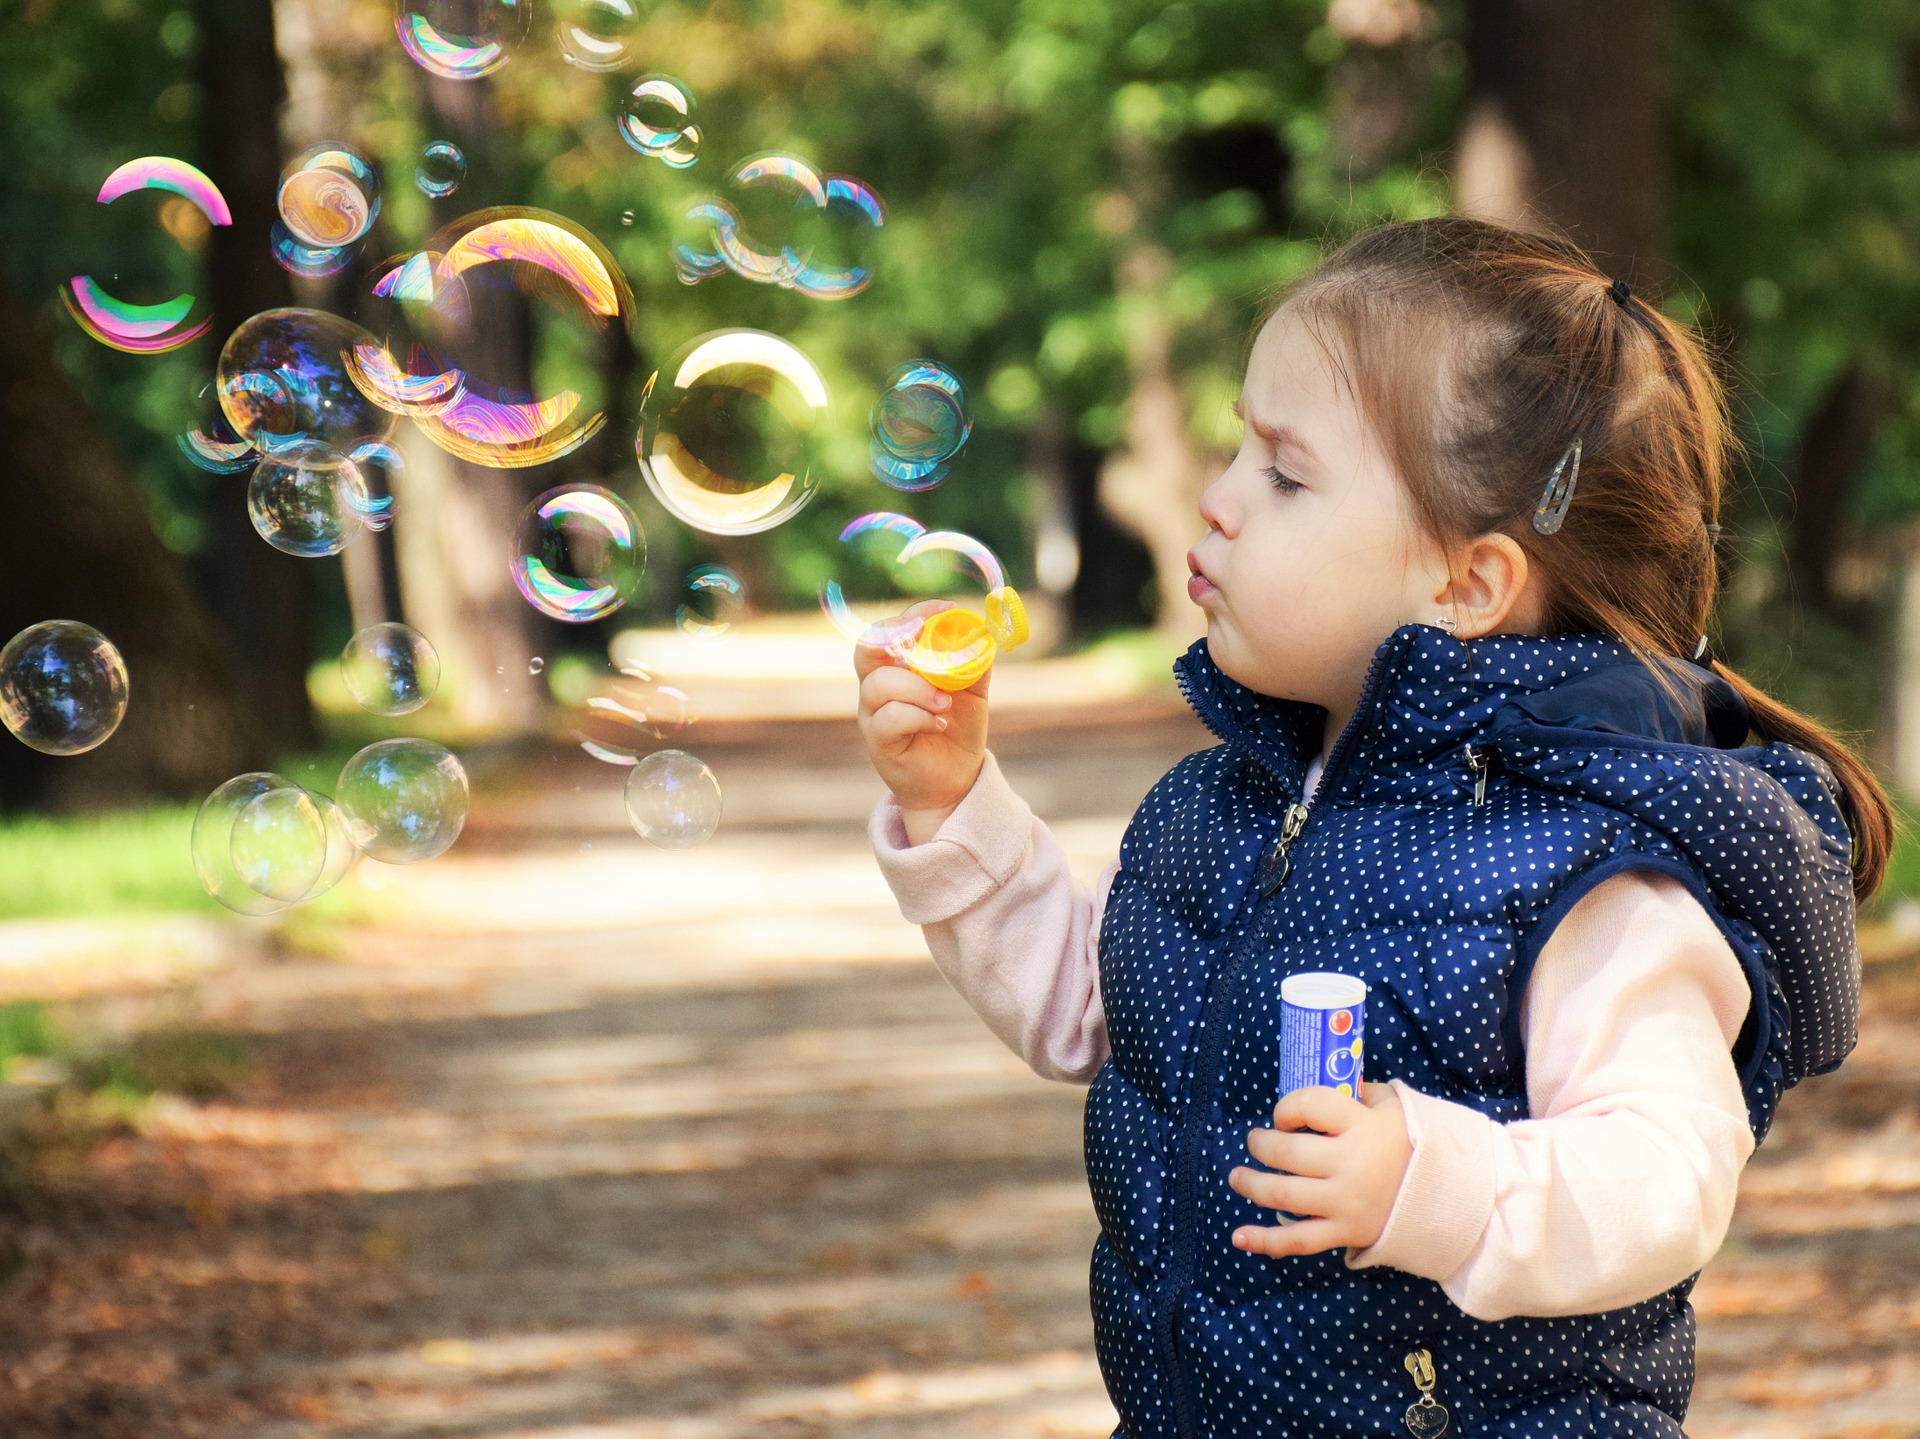 A child blows bubbles for fun on the sidewalk outside. She’s dressed in a pink sweatshirt and a blue with white polka dots gilet over it.